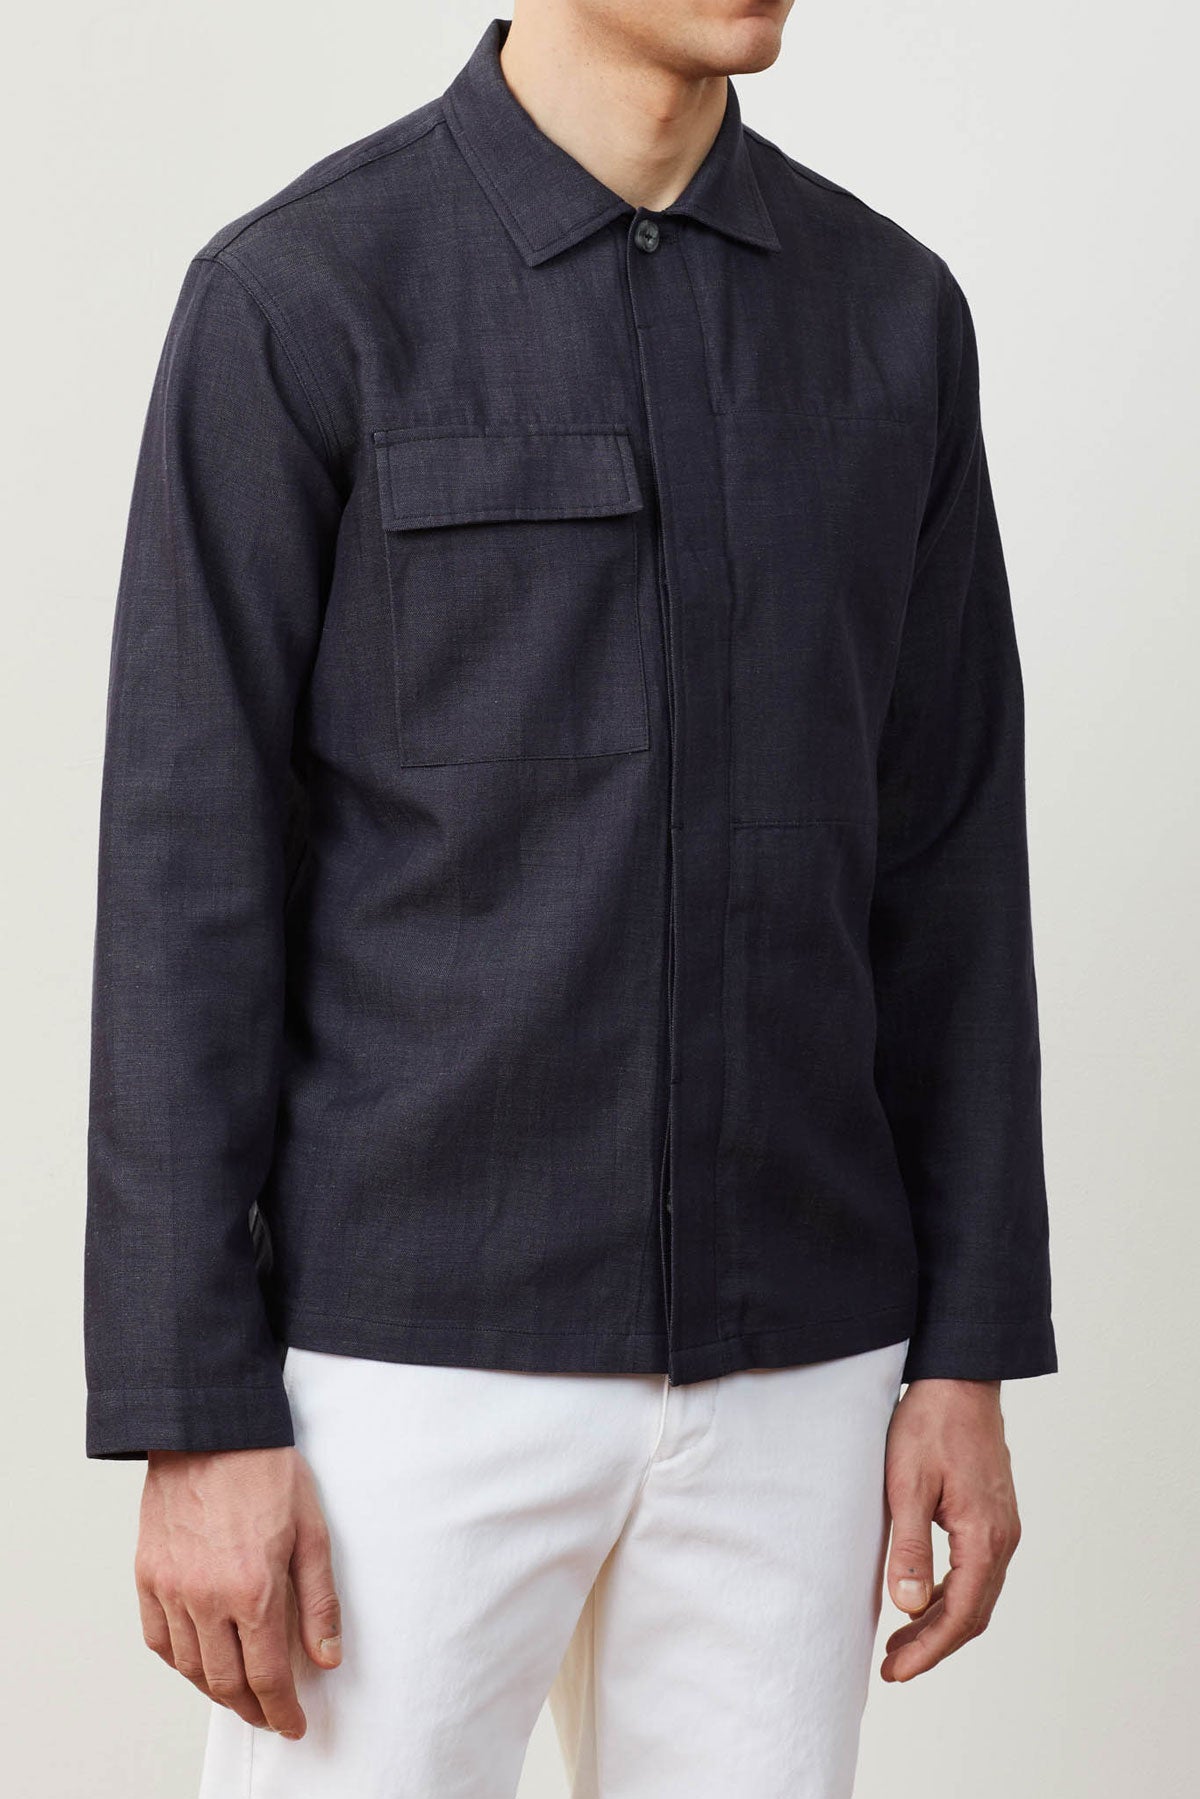 Waist down image of Daniele wearing the Experiment 259 - Woollinen Hardshirt in Chambray Gray